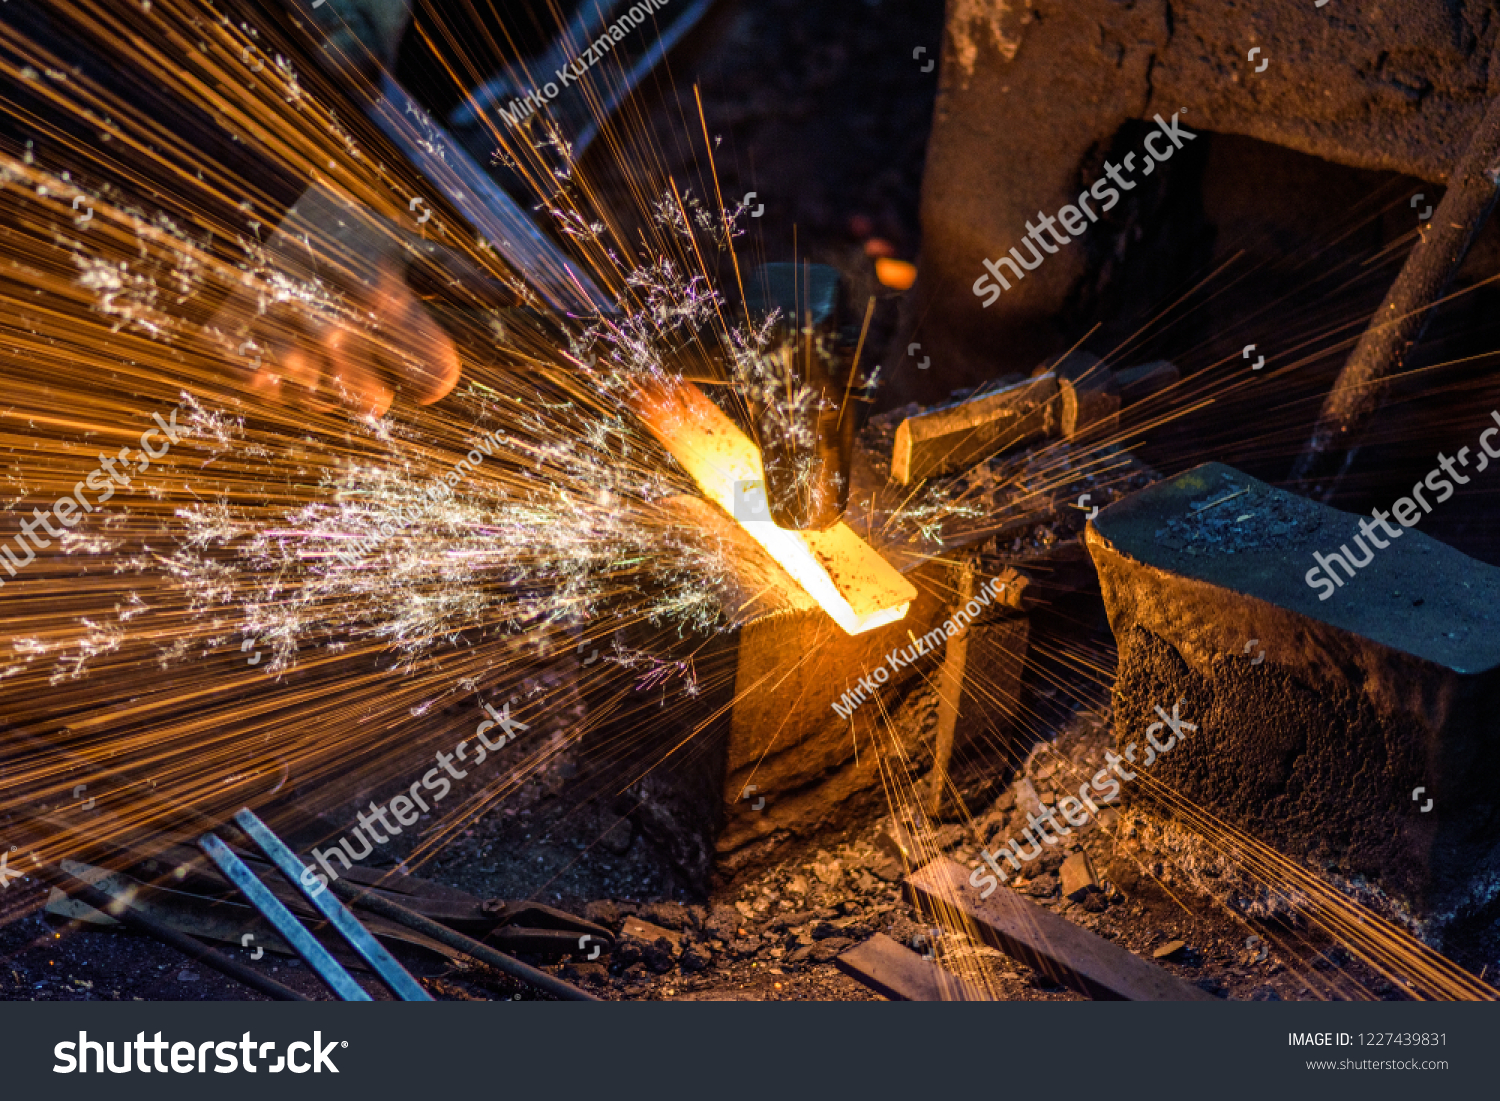 Blacksmith manually forging the molten metal on the anvil with spark fireworks #1227439831